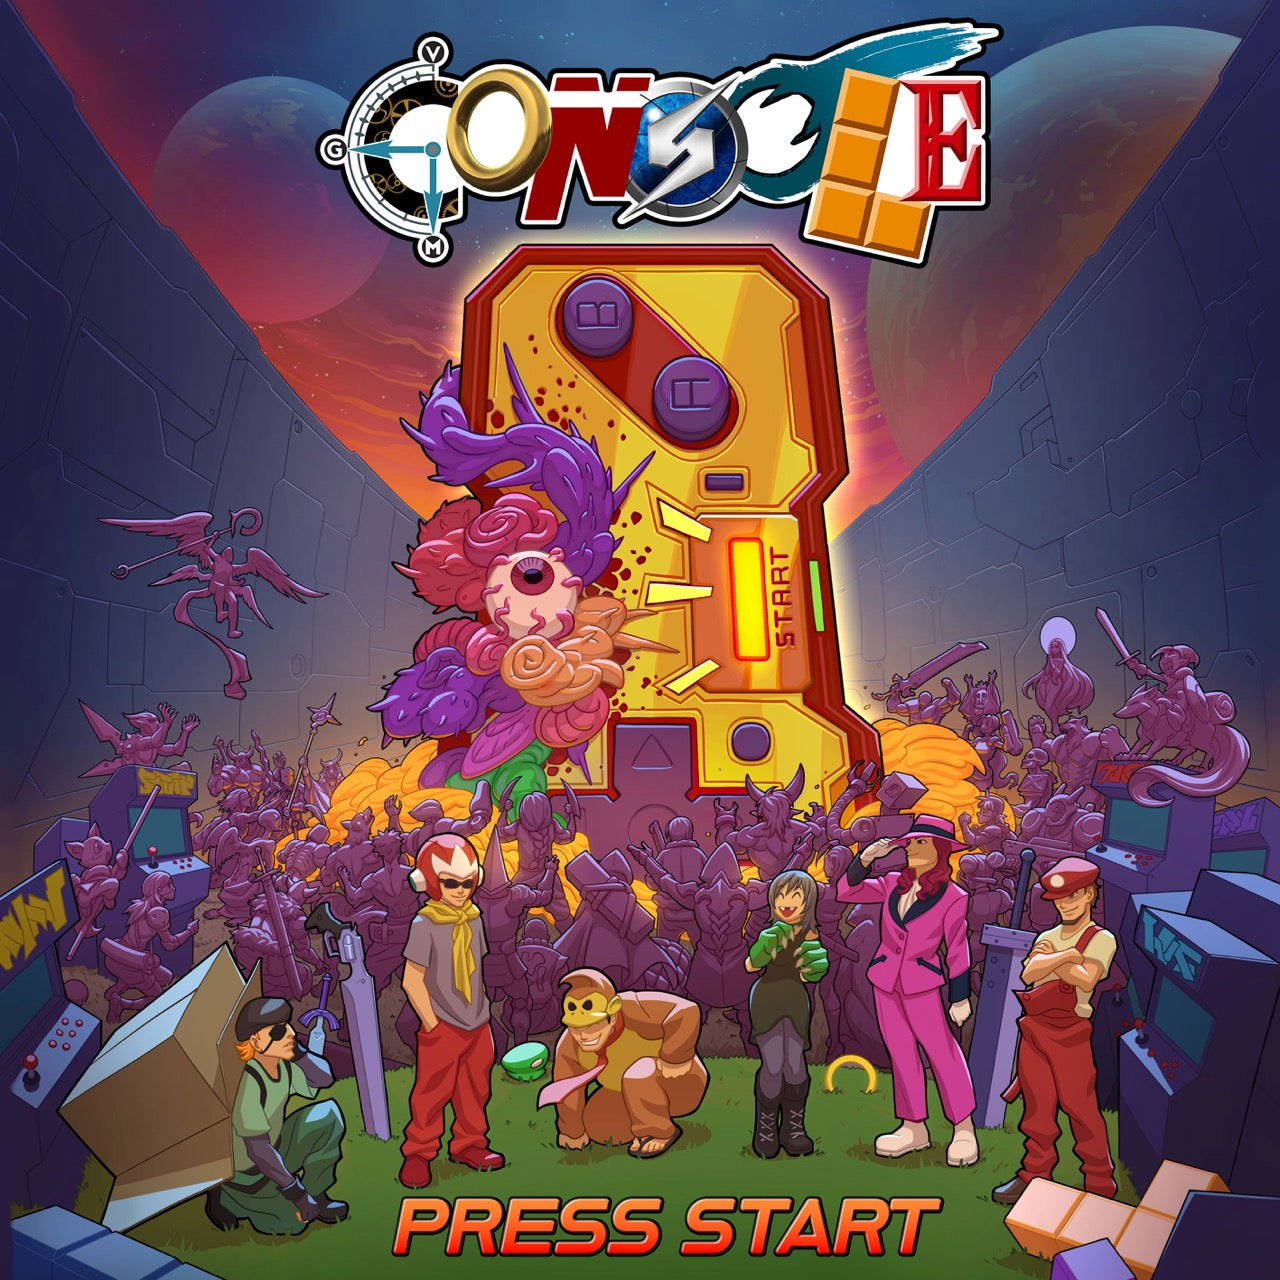 Console (The VGM Band) - Press Start [CD]